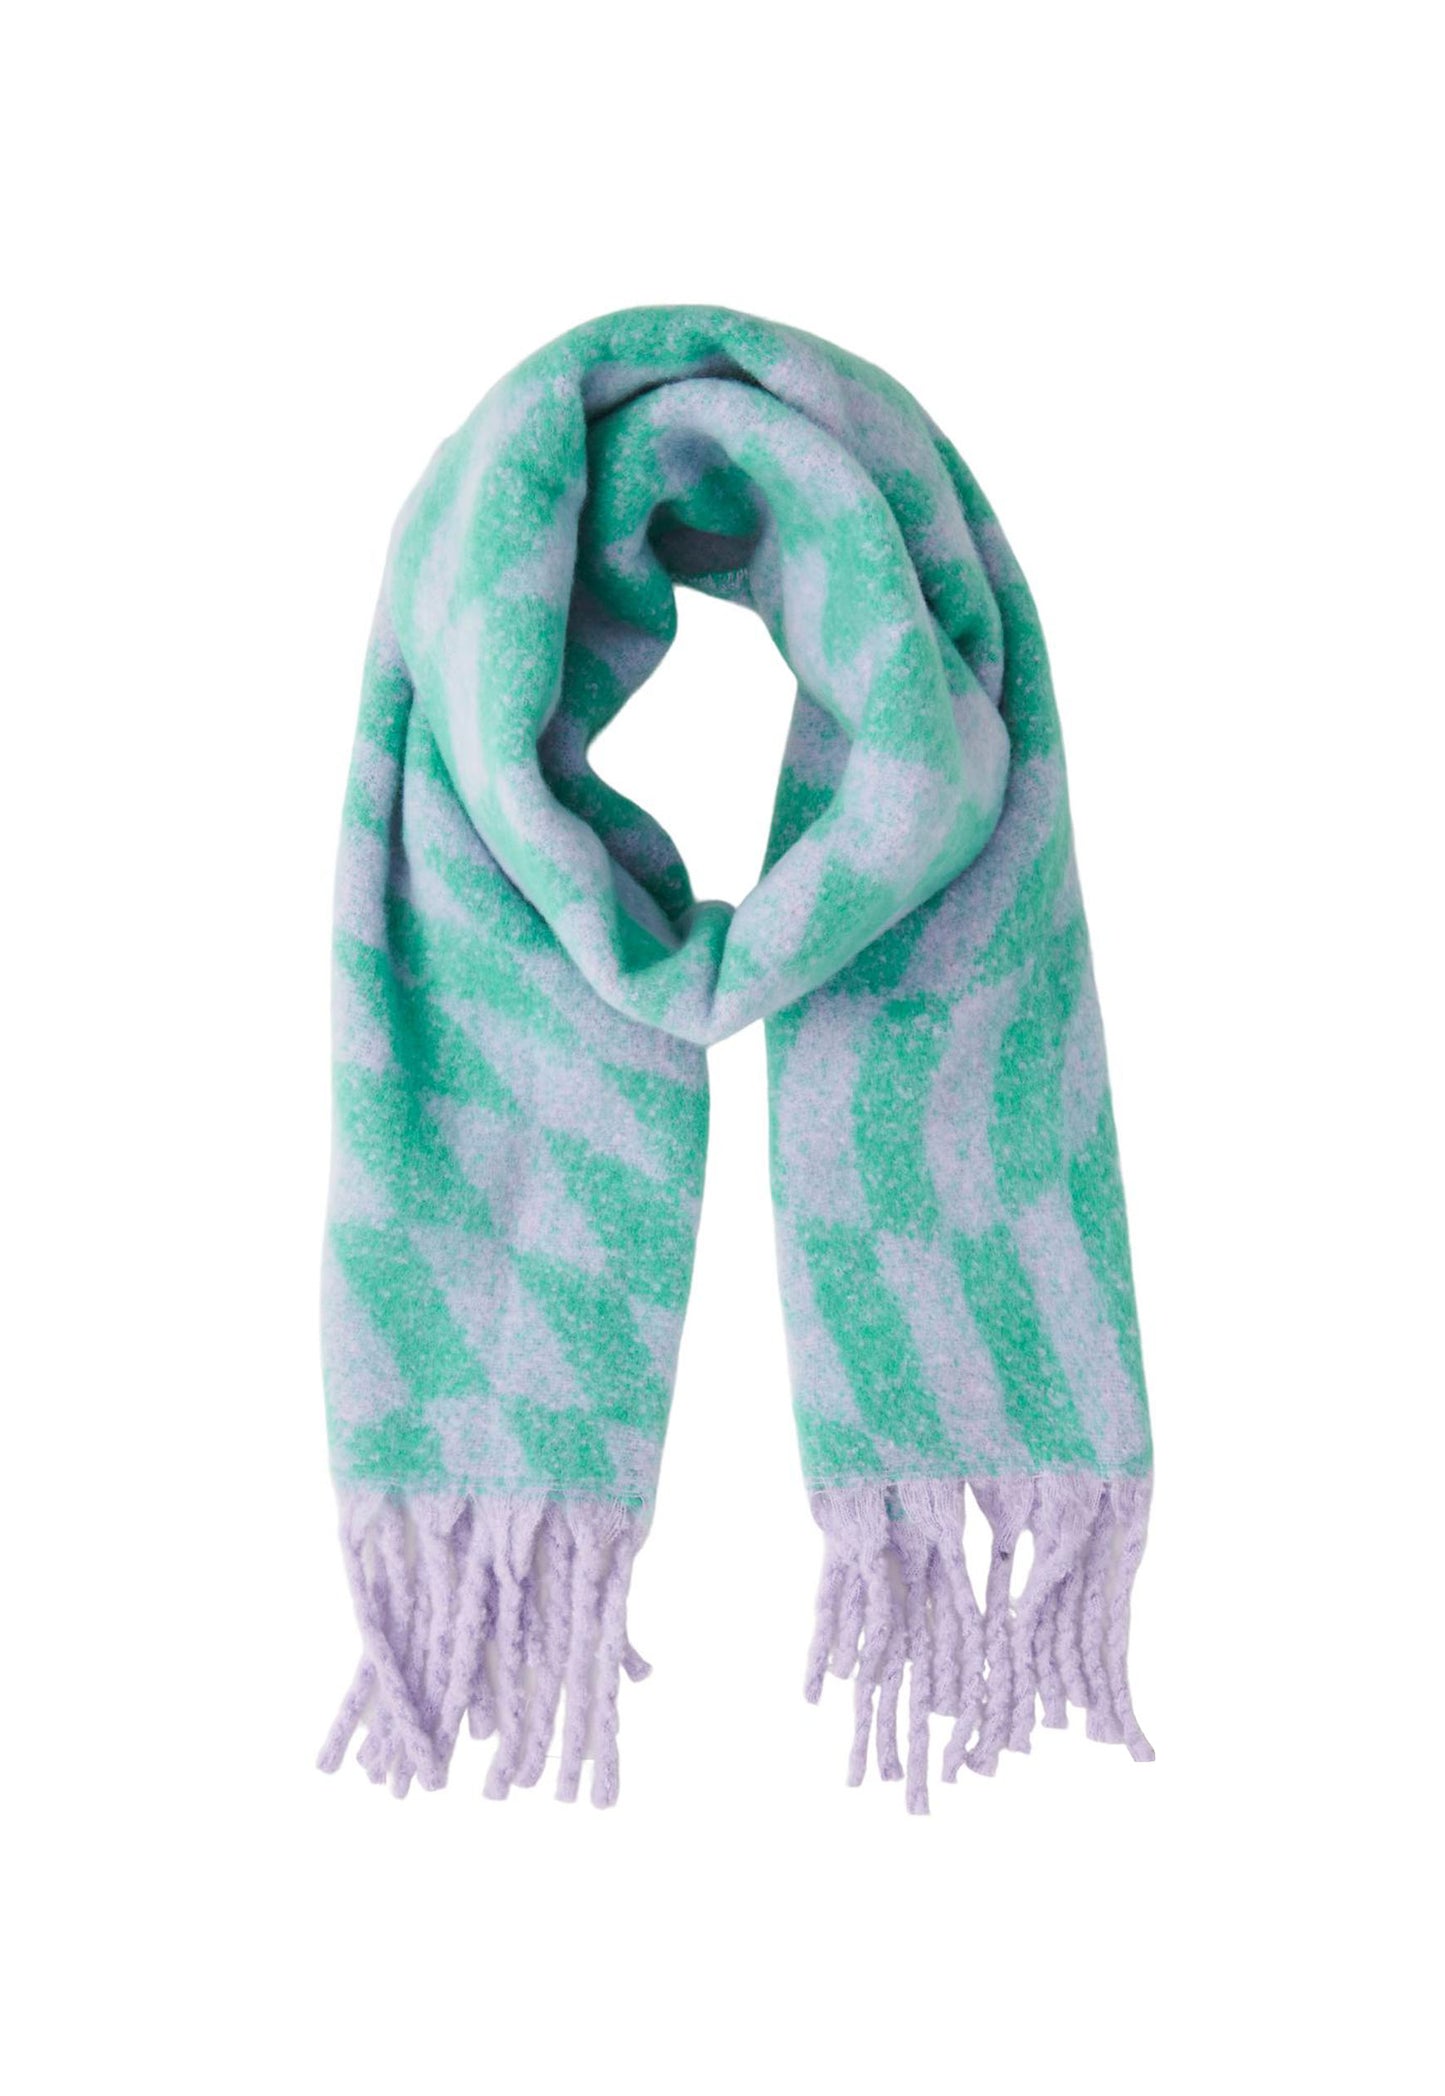 PIECES Nyx Oversized Brushed Printed Scarf with Tassels in Lilac & Aqua - One Nation Clothing